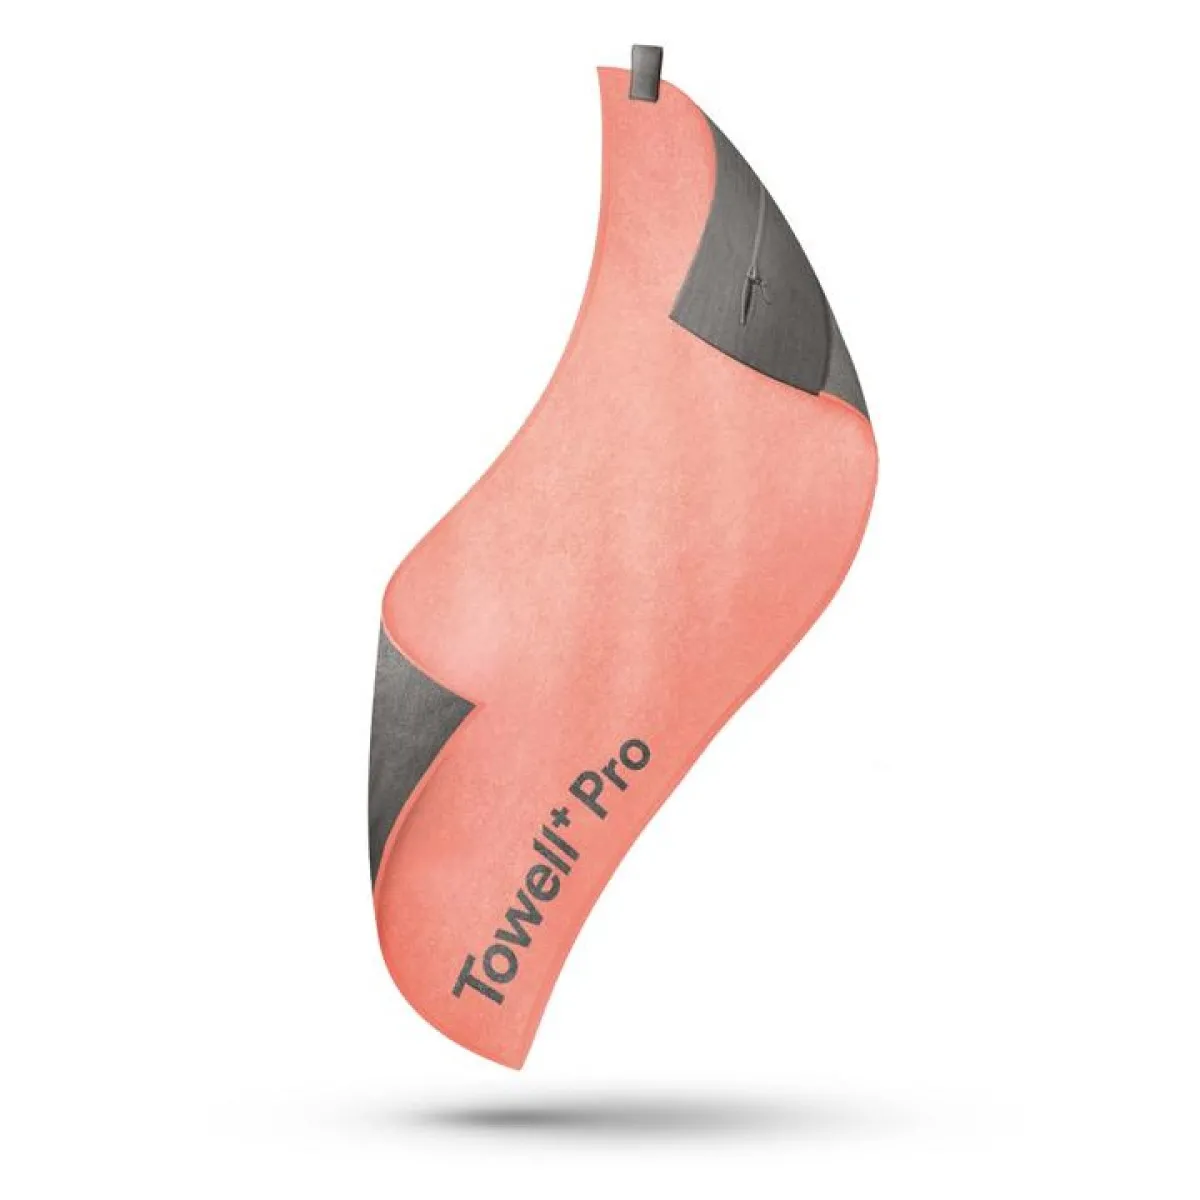 Towell Pro fitness towel